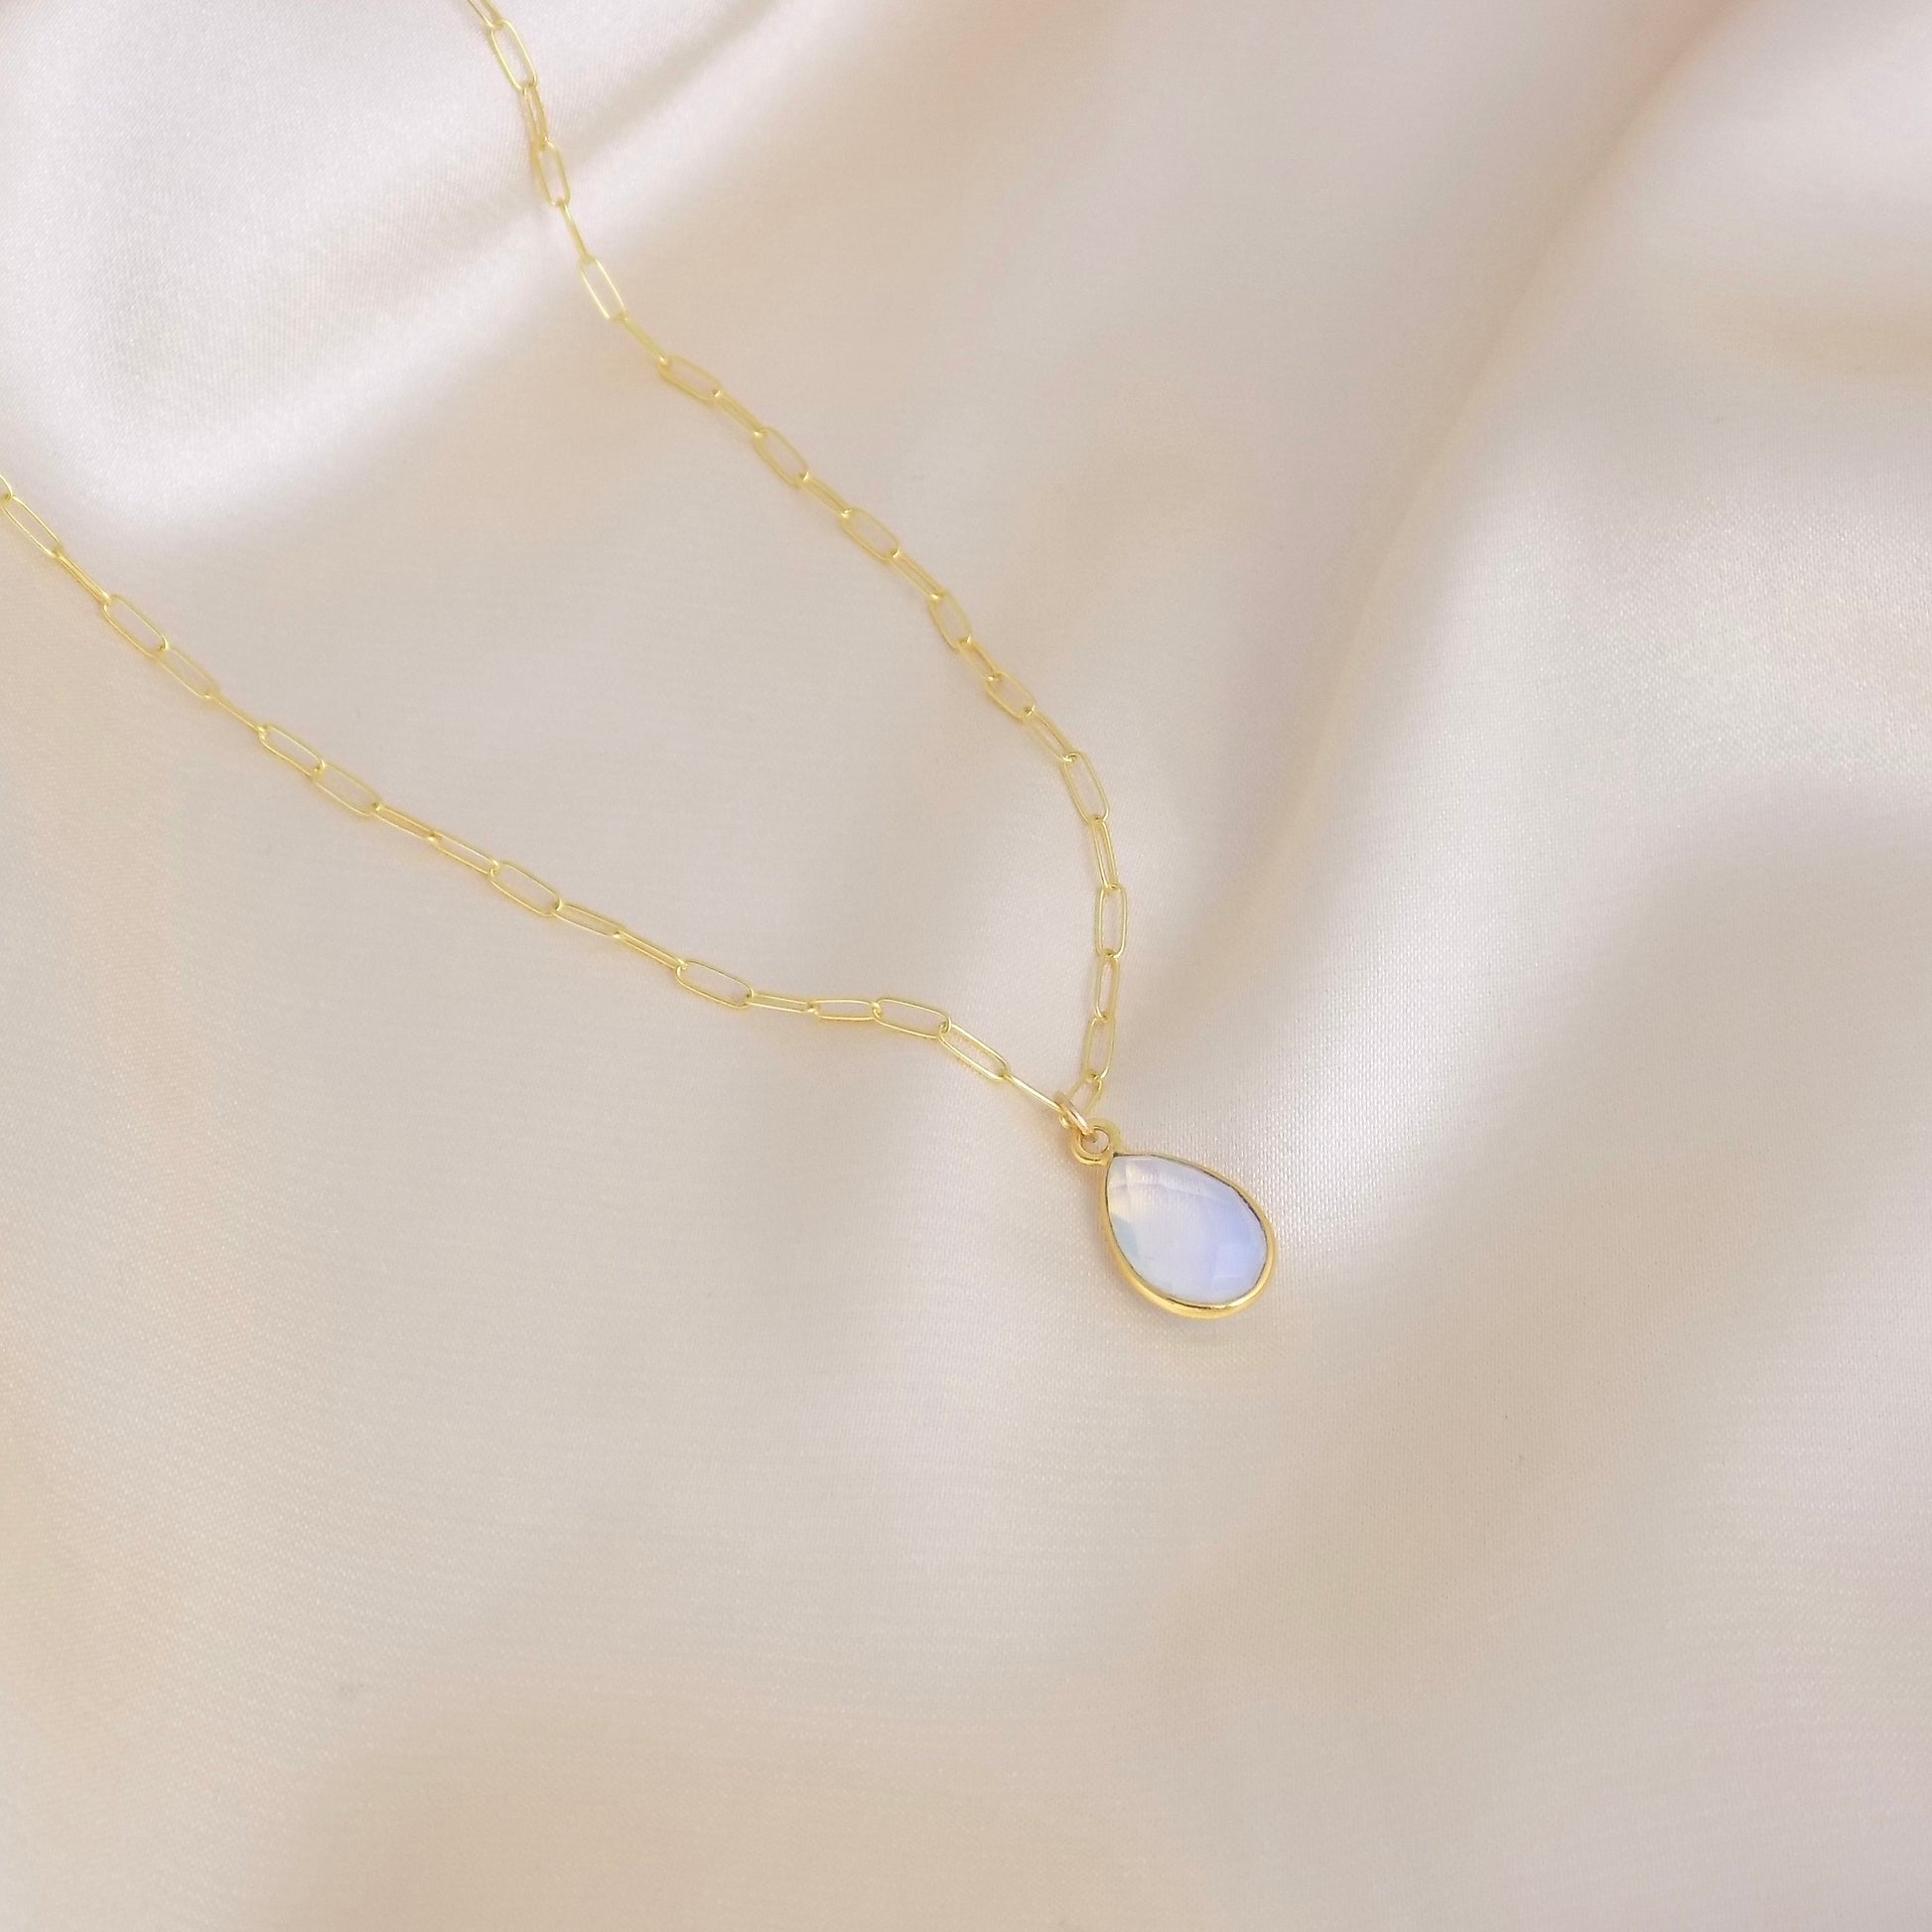 Unique Birthday Gift, Opal Necklace Gold, Paperclip Chain 14K Gold Filled, October Birthstone Jewelry, Gift For Best Friend, M6-95